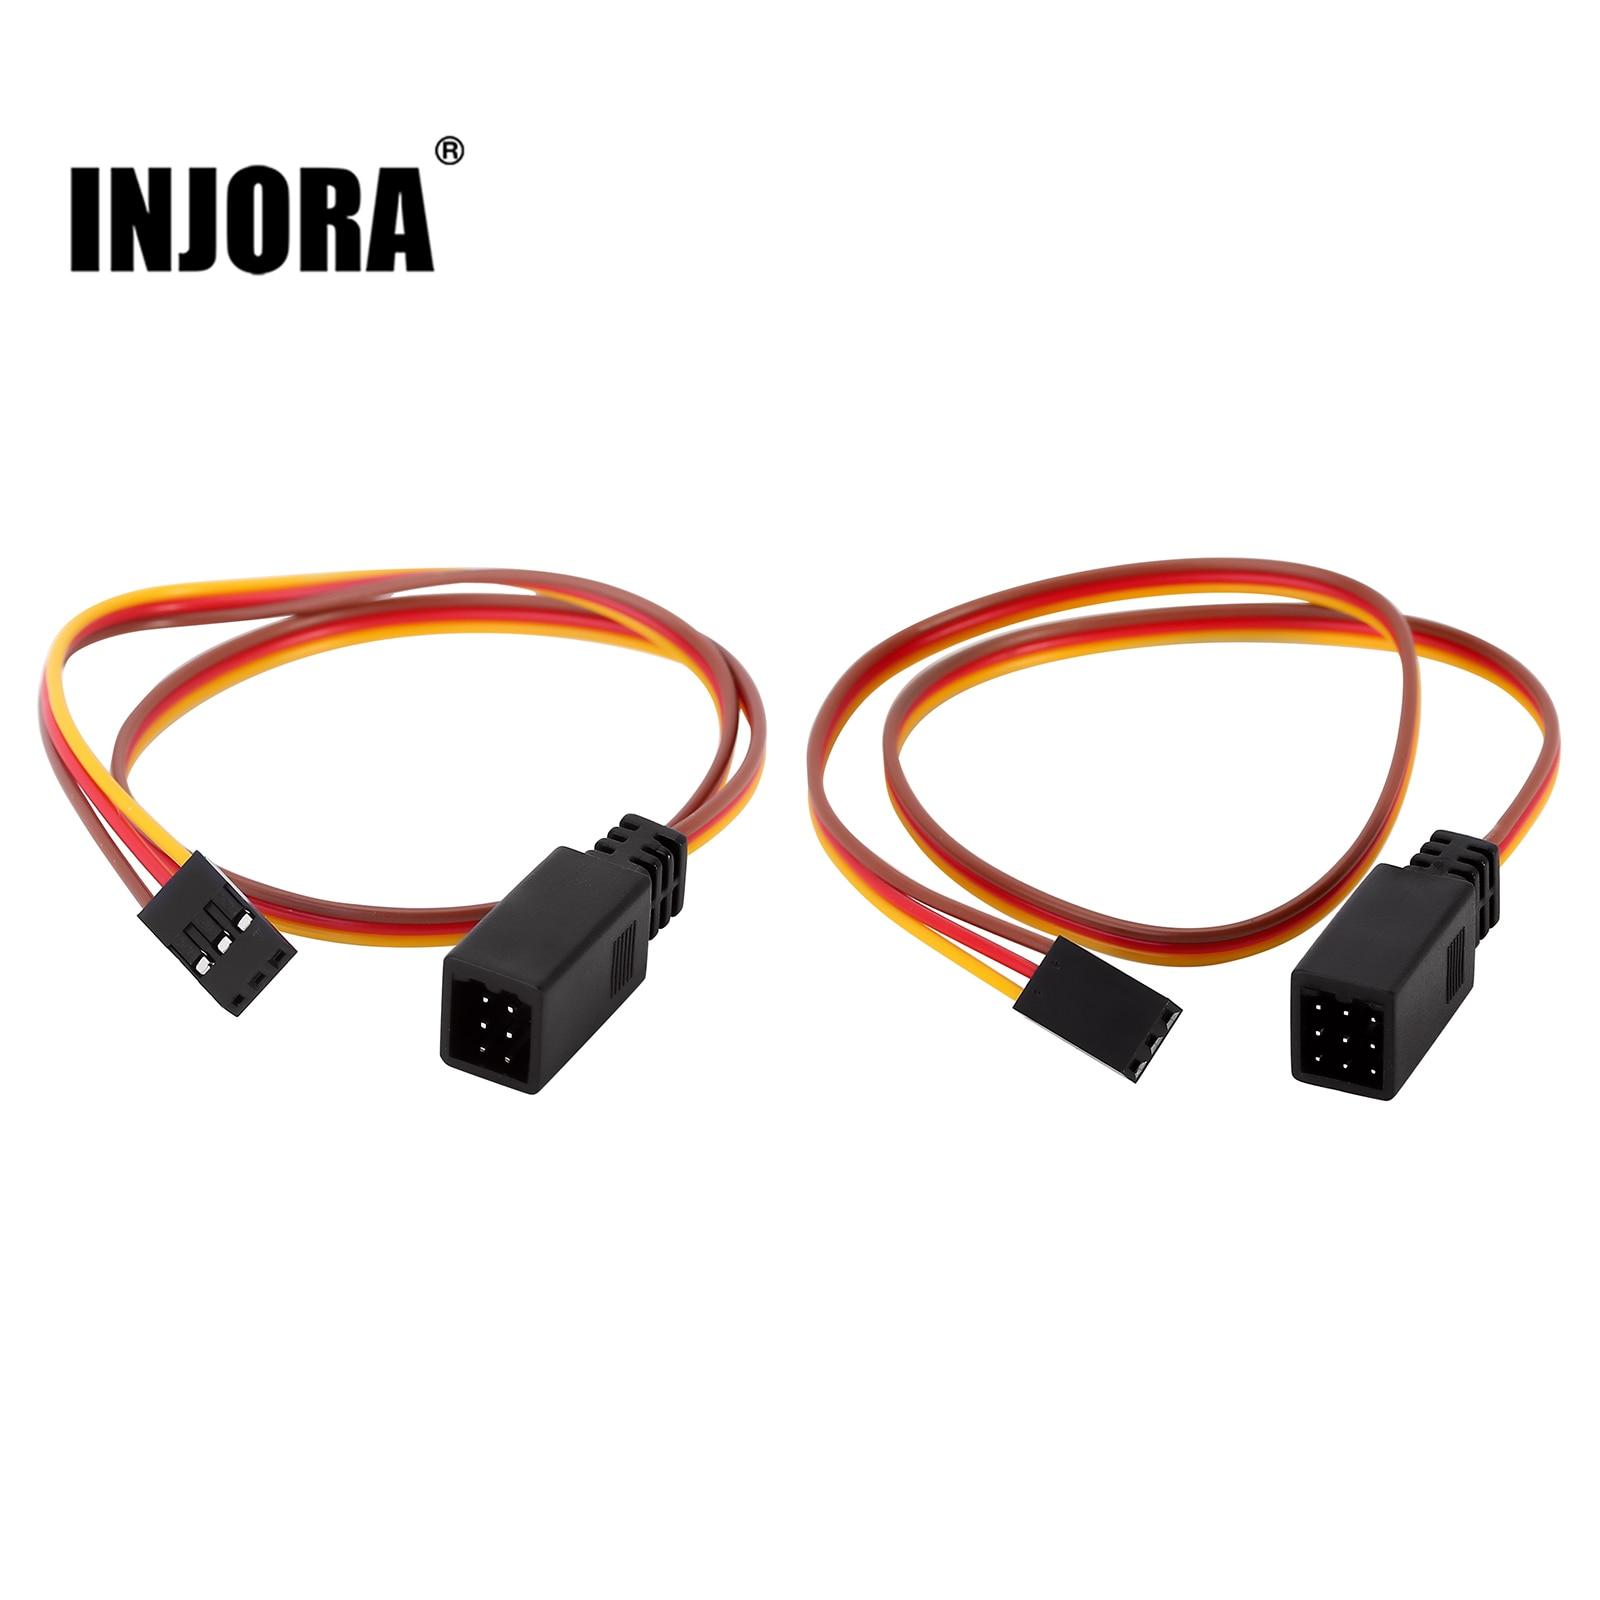 INJORA-RC-Servo-JR-Plug-Extension-Wire-Cable-1-to-2-1-to-3-for-RC.jpg